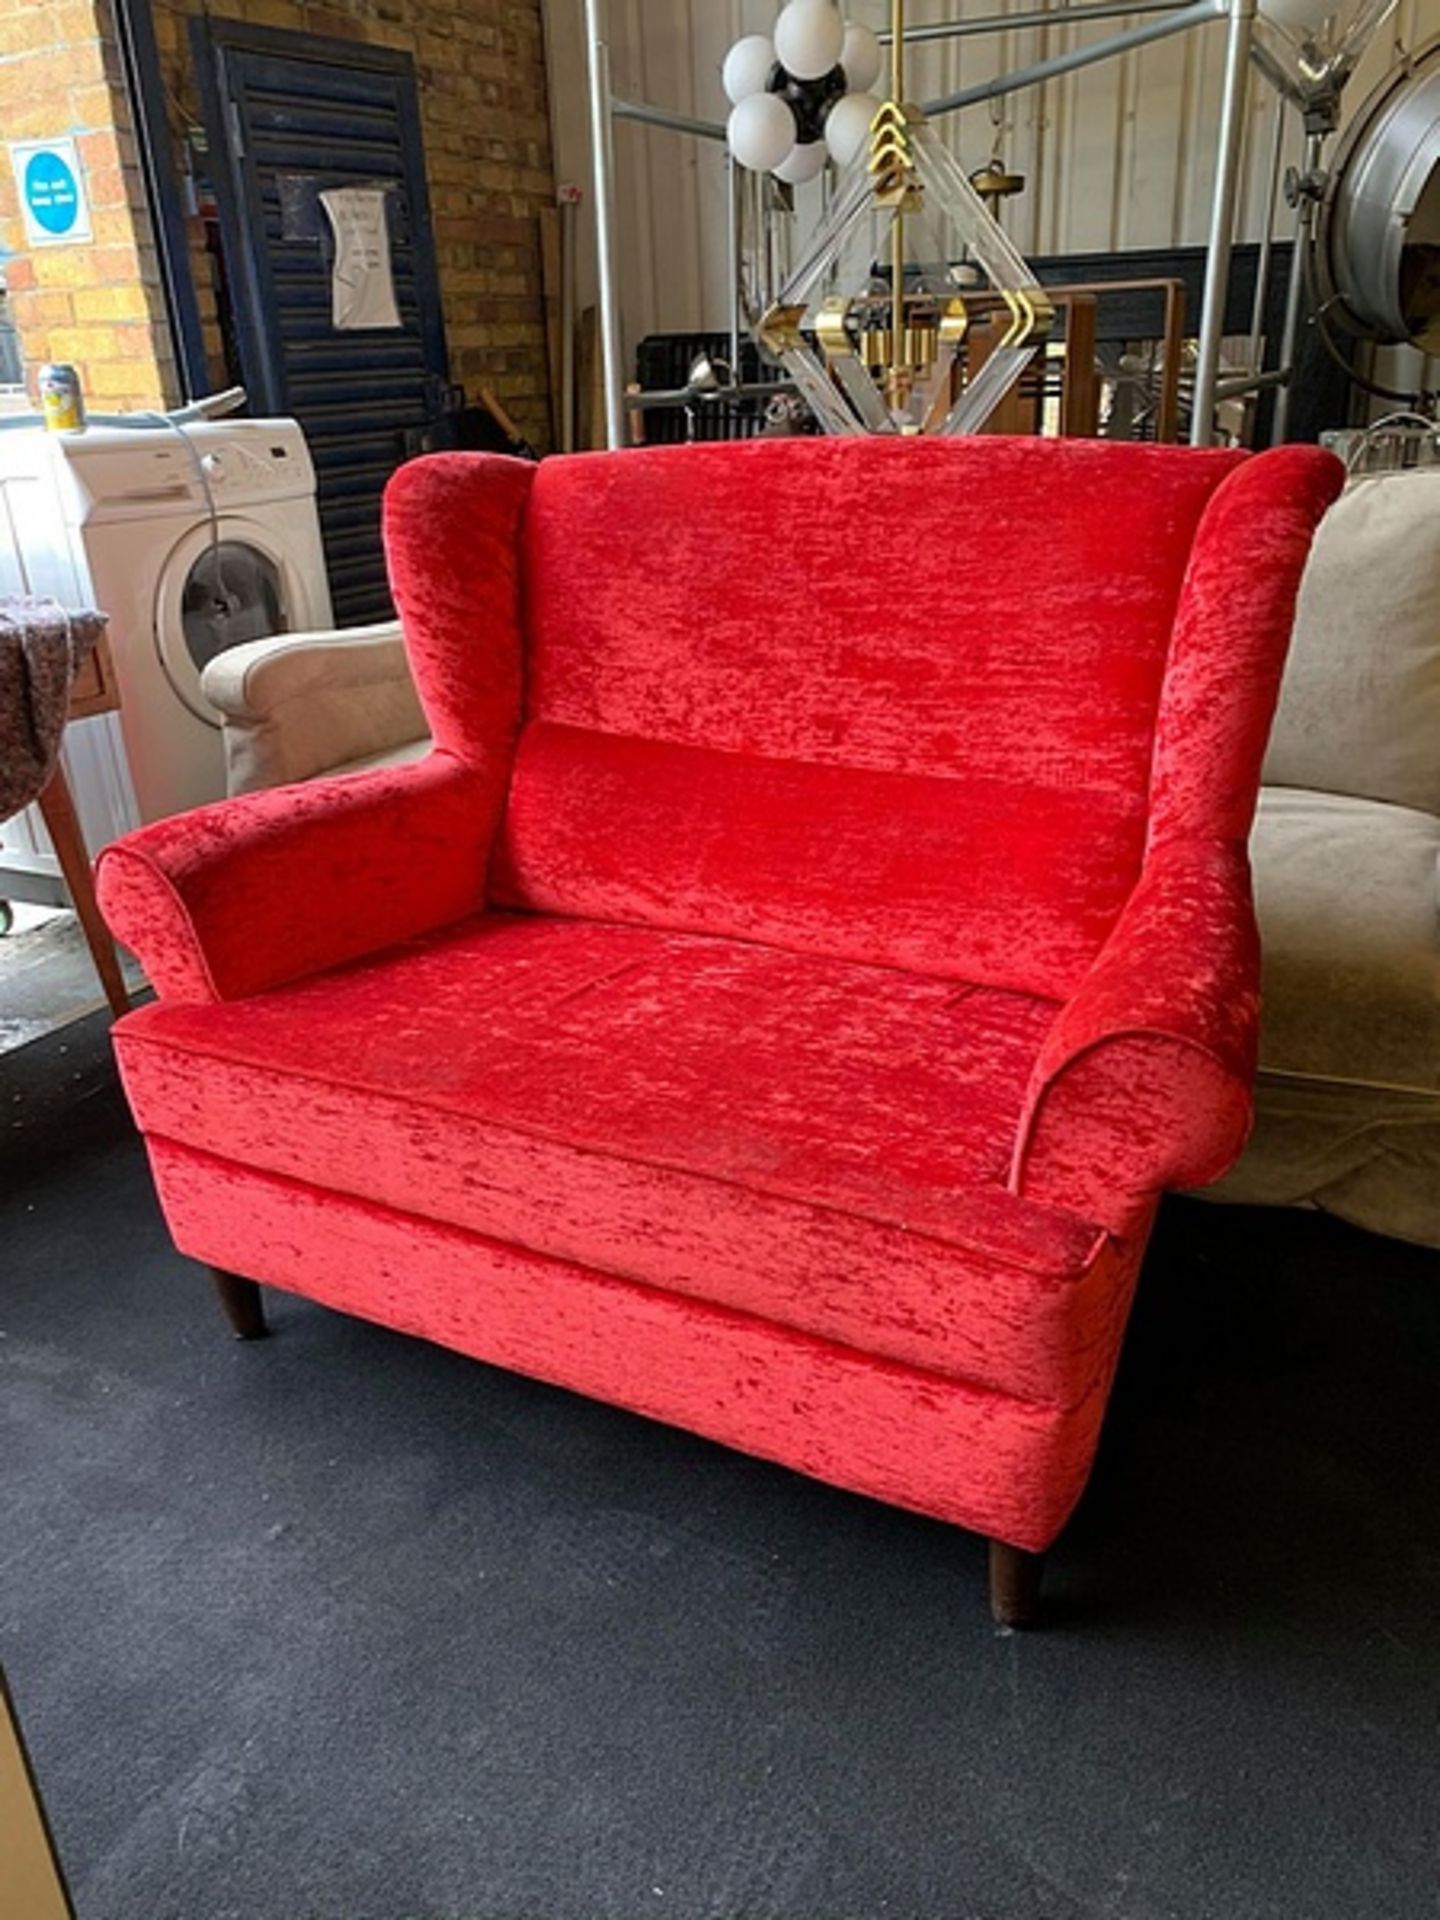 Satelliet UK Barok Sofa Red Crushed Velvet a vibrant and comfortable sofa designed with plenty of